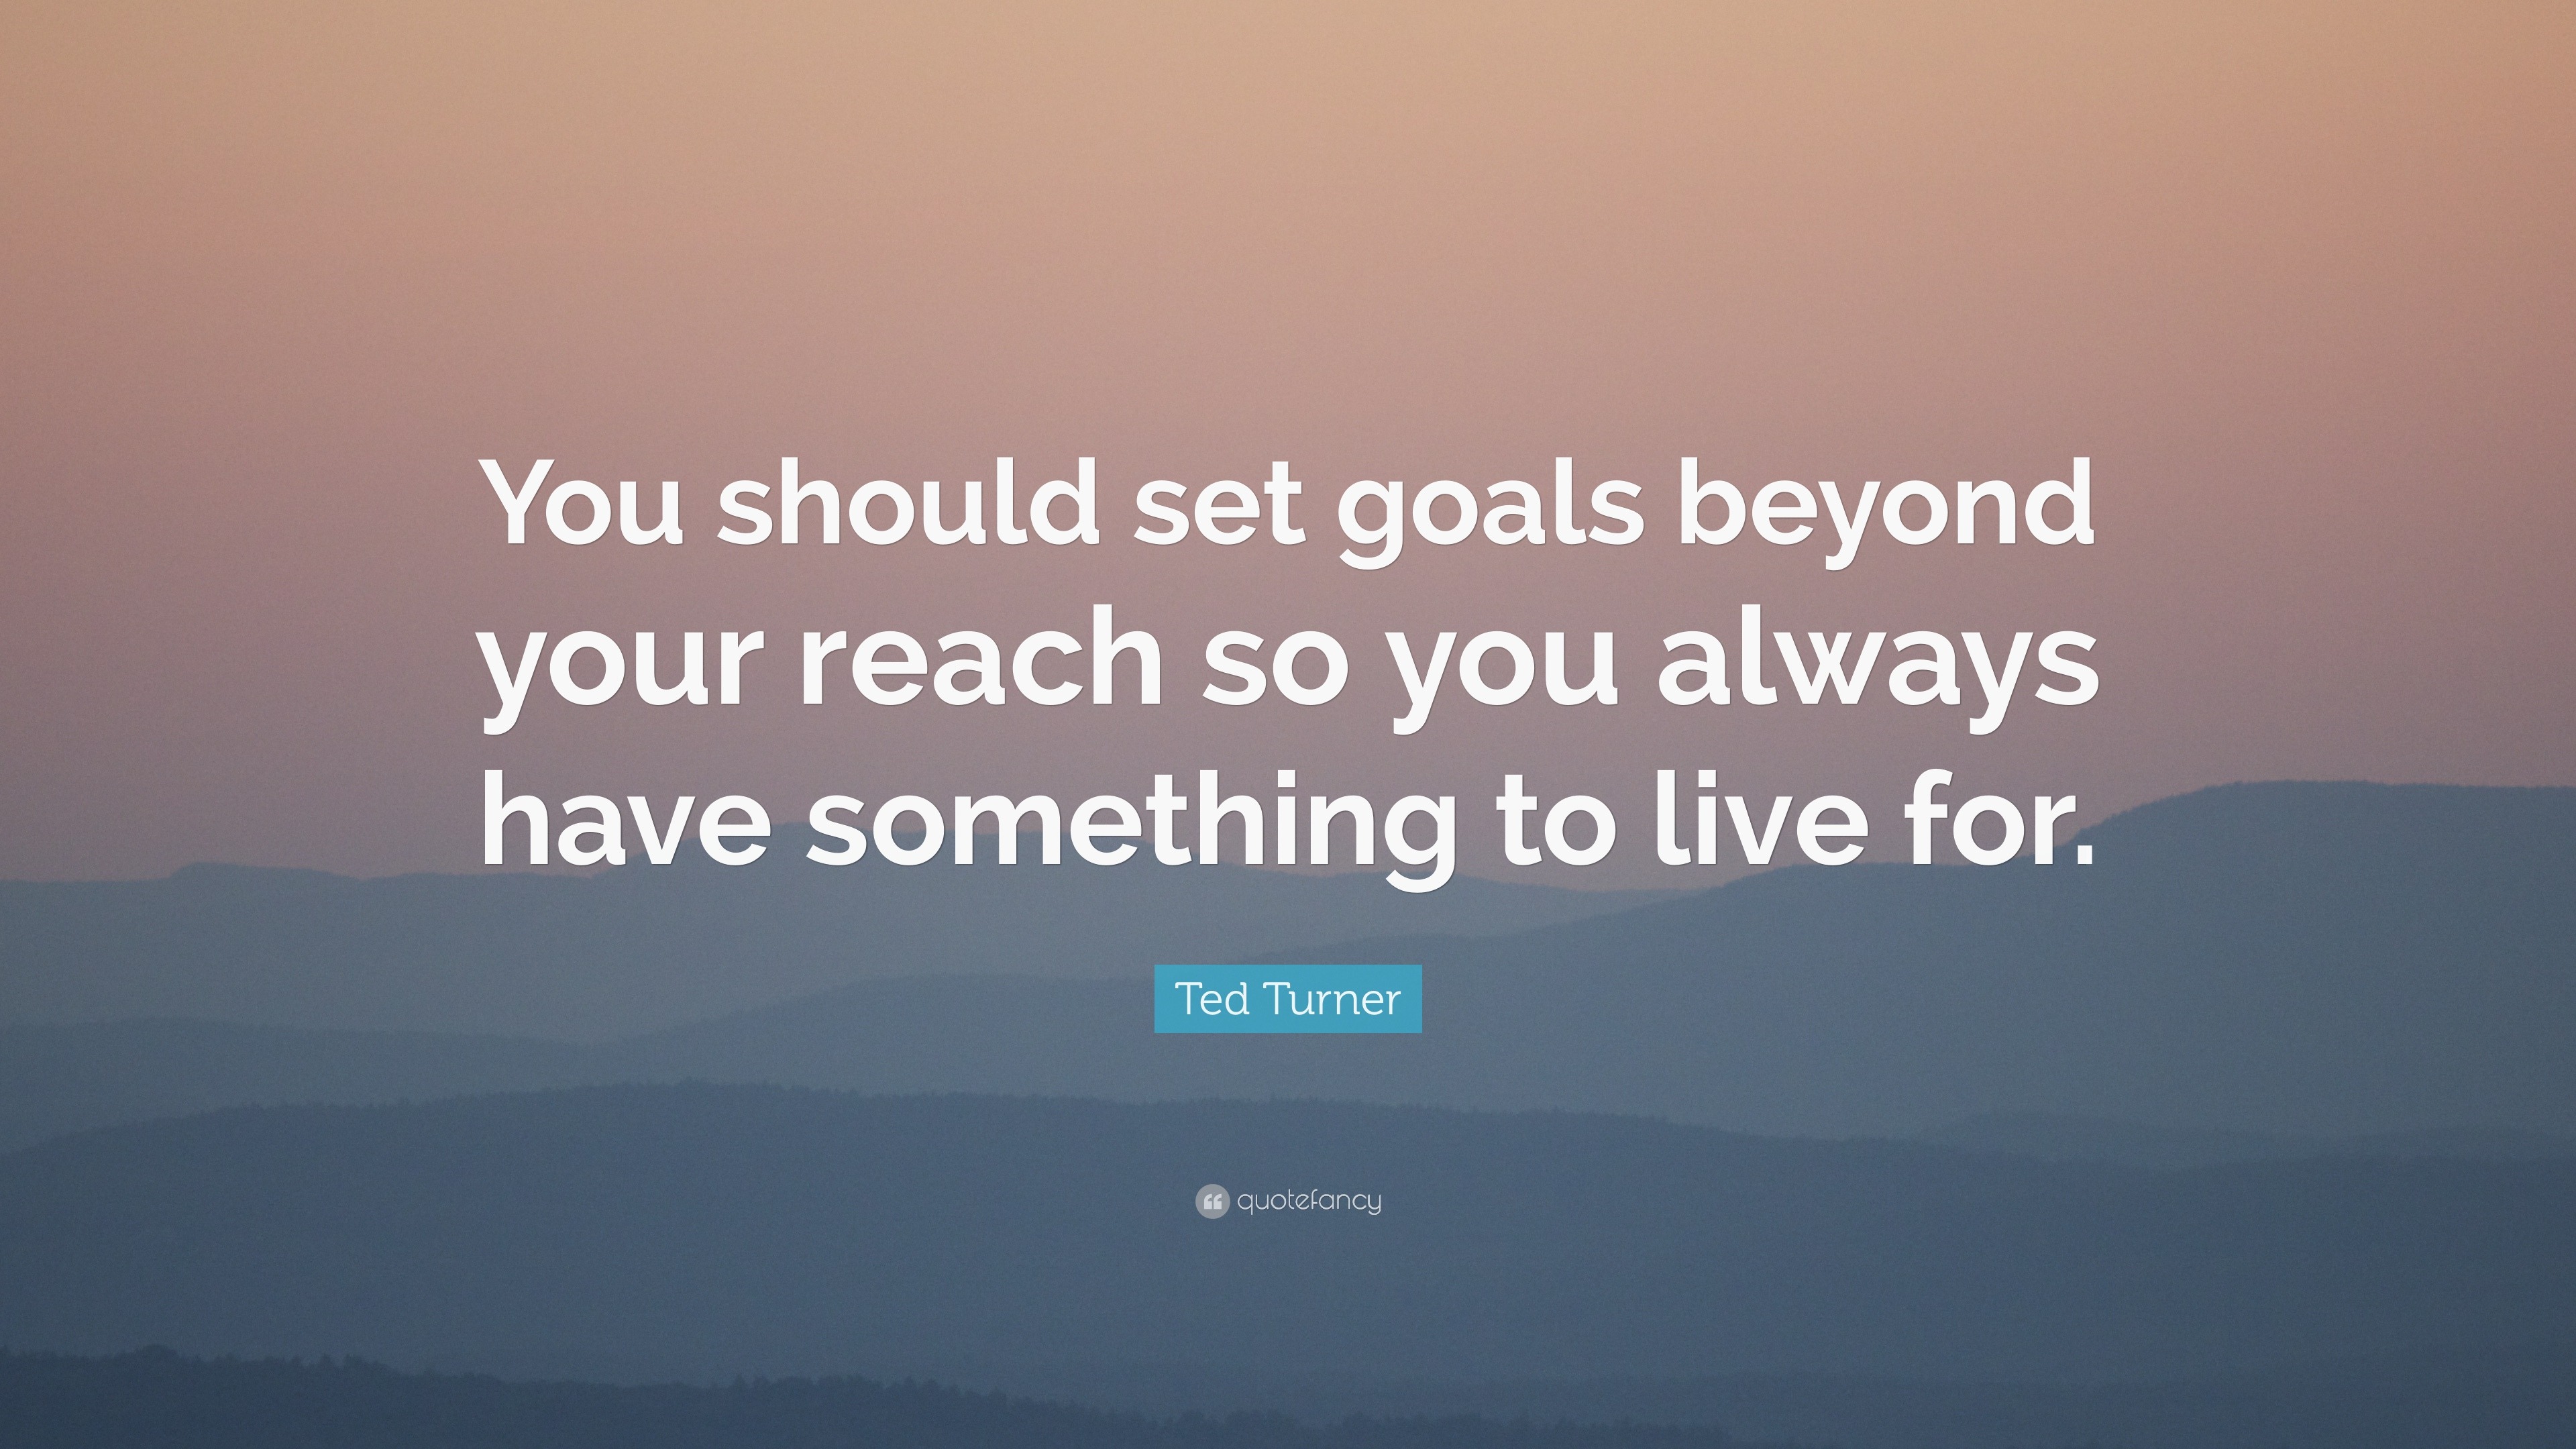 Ted Turner Quote: “You should set goals beyond your reach so you always ...